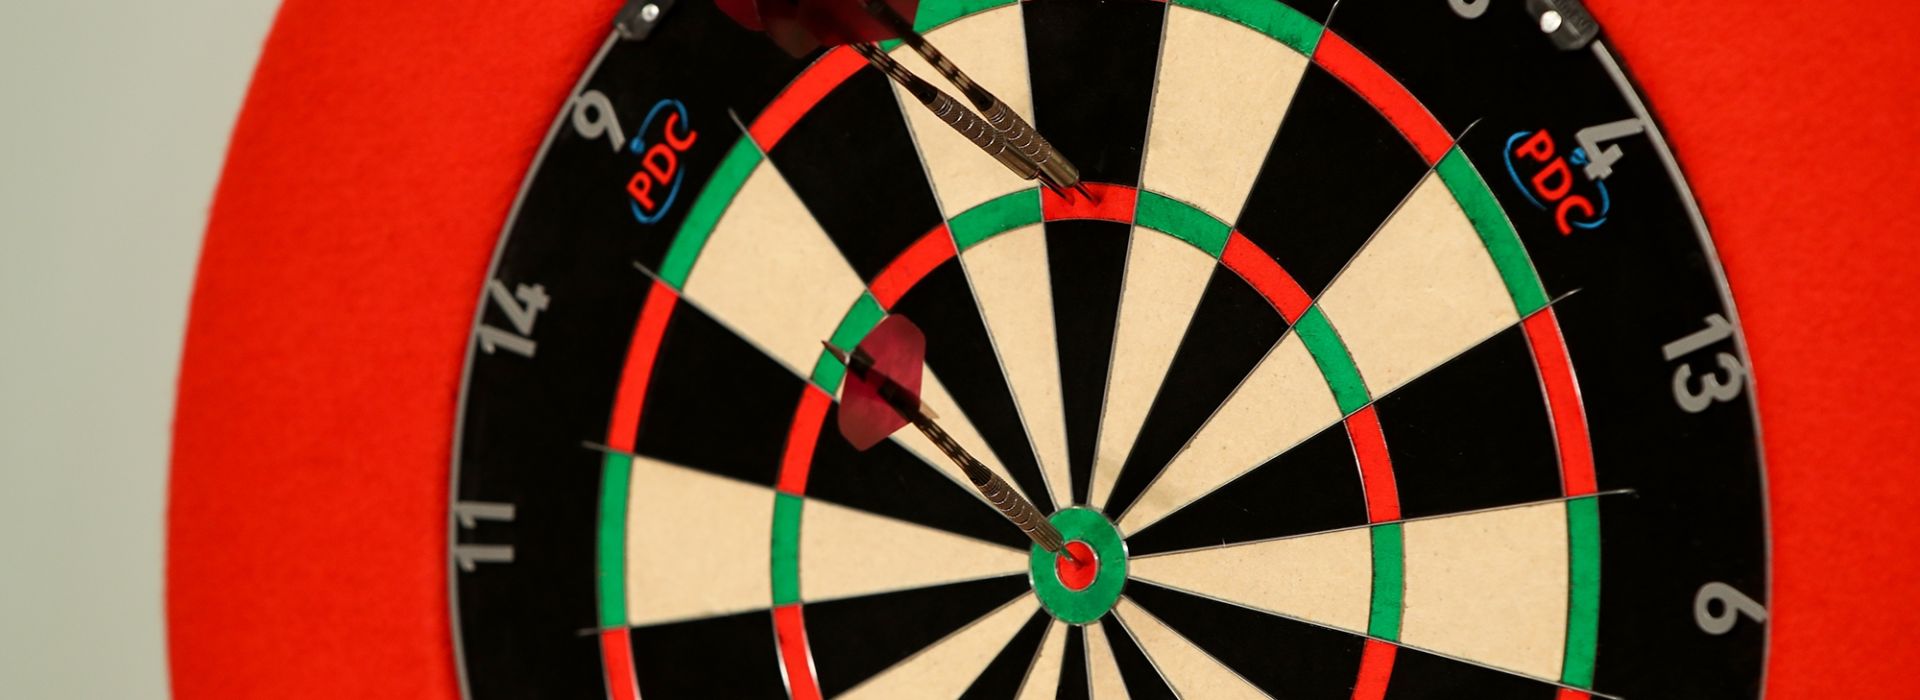 PDC UK Q-School Final Stage 2023 - TV DartConnect